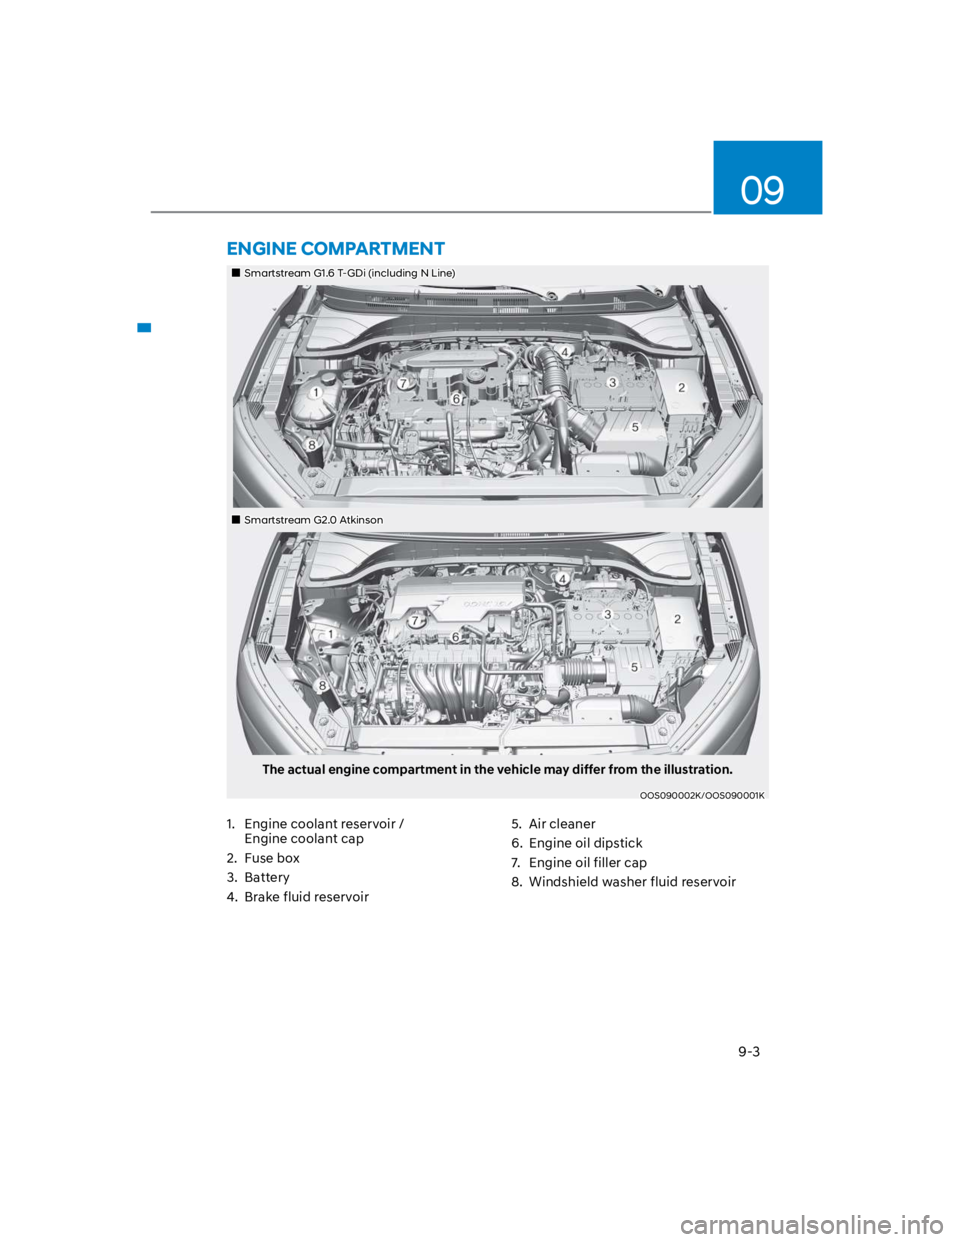 HYUNDAI KONA 2022  Owners Manual 9-3
09
Smartstream G1.6 T-GDi (including N Line)
Smartstream G2.0 Atkinson
The actual engine compartment in the vehicle may differ from the illustration.
OOS090002K/OOS090001K
1.  Engine coolant reser